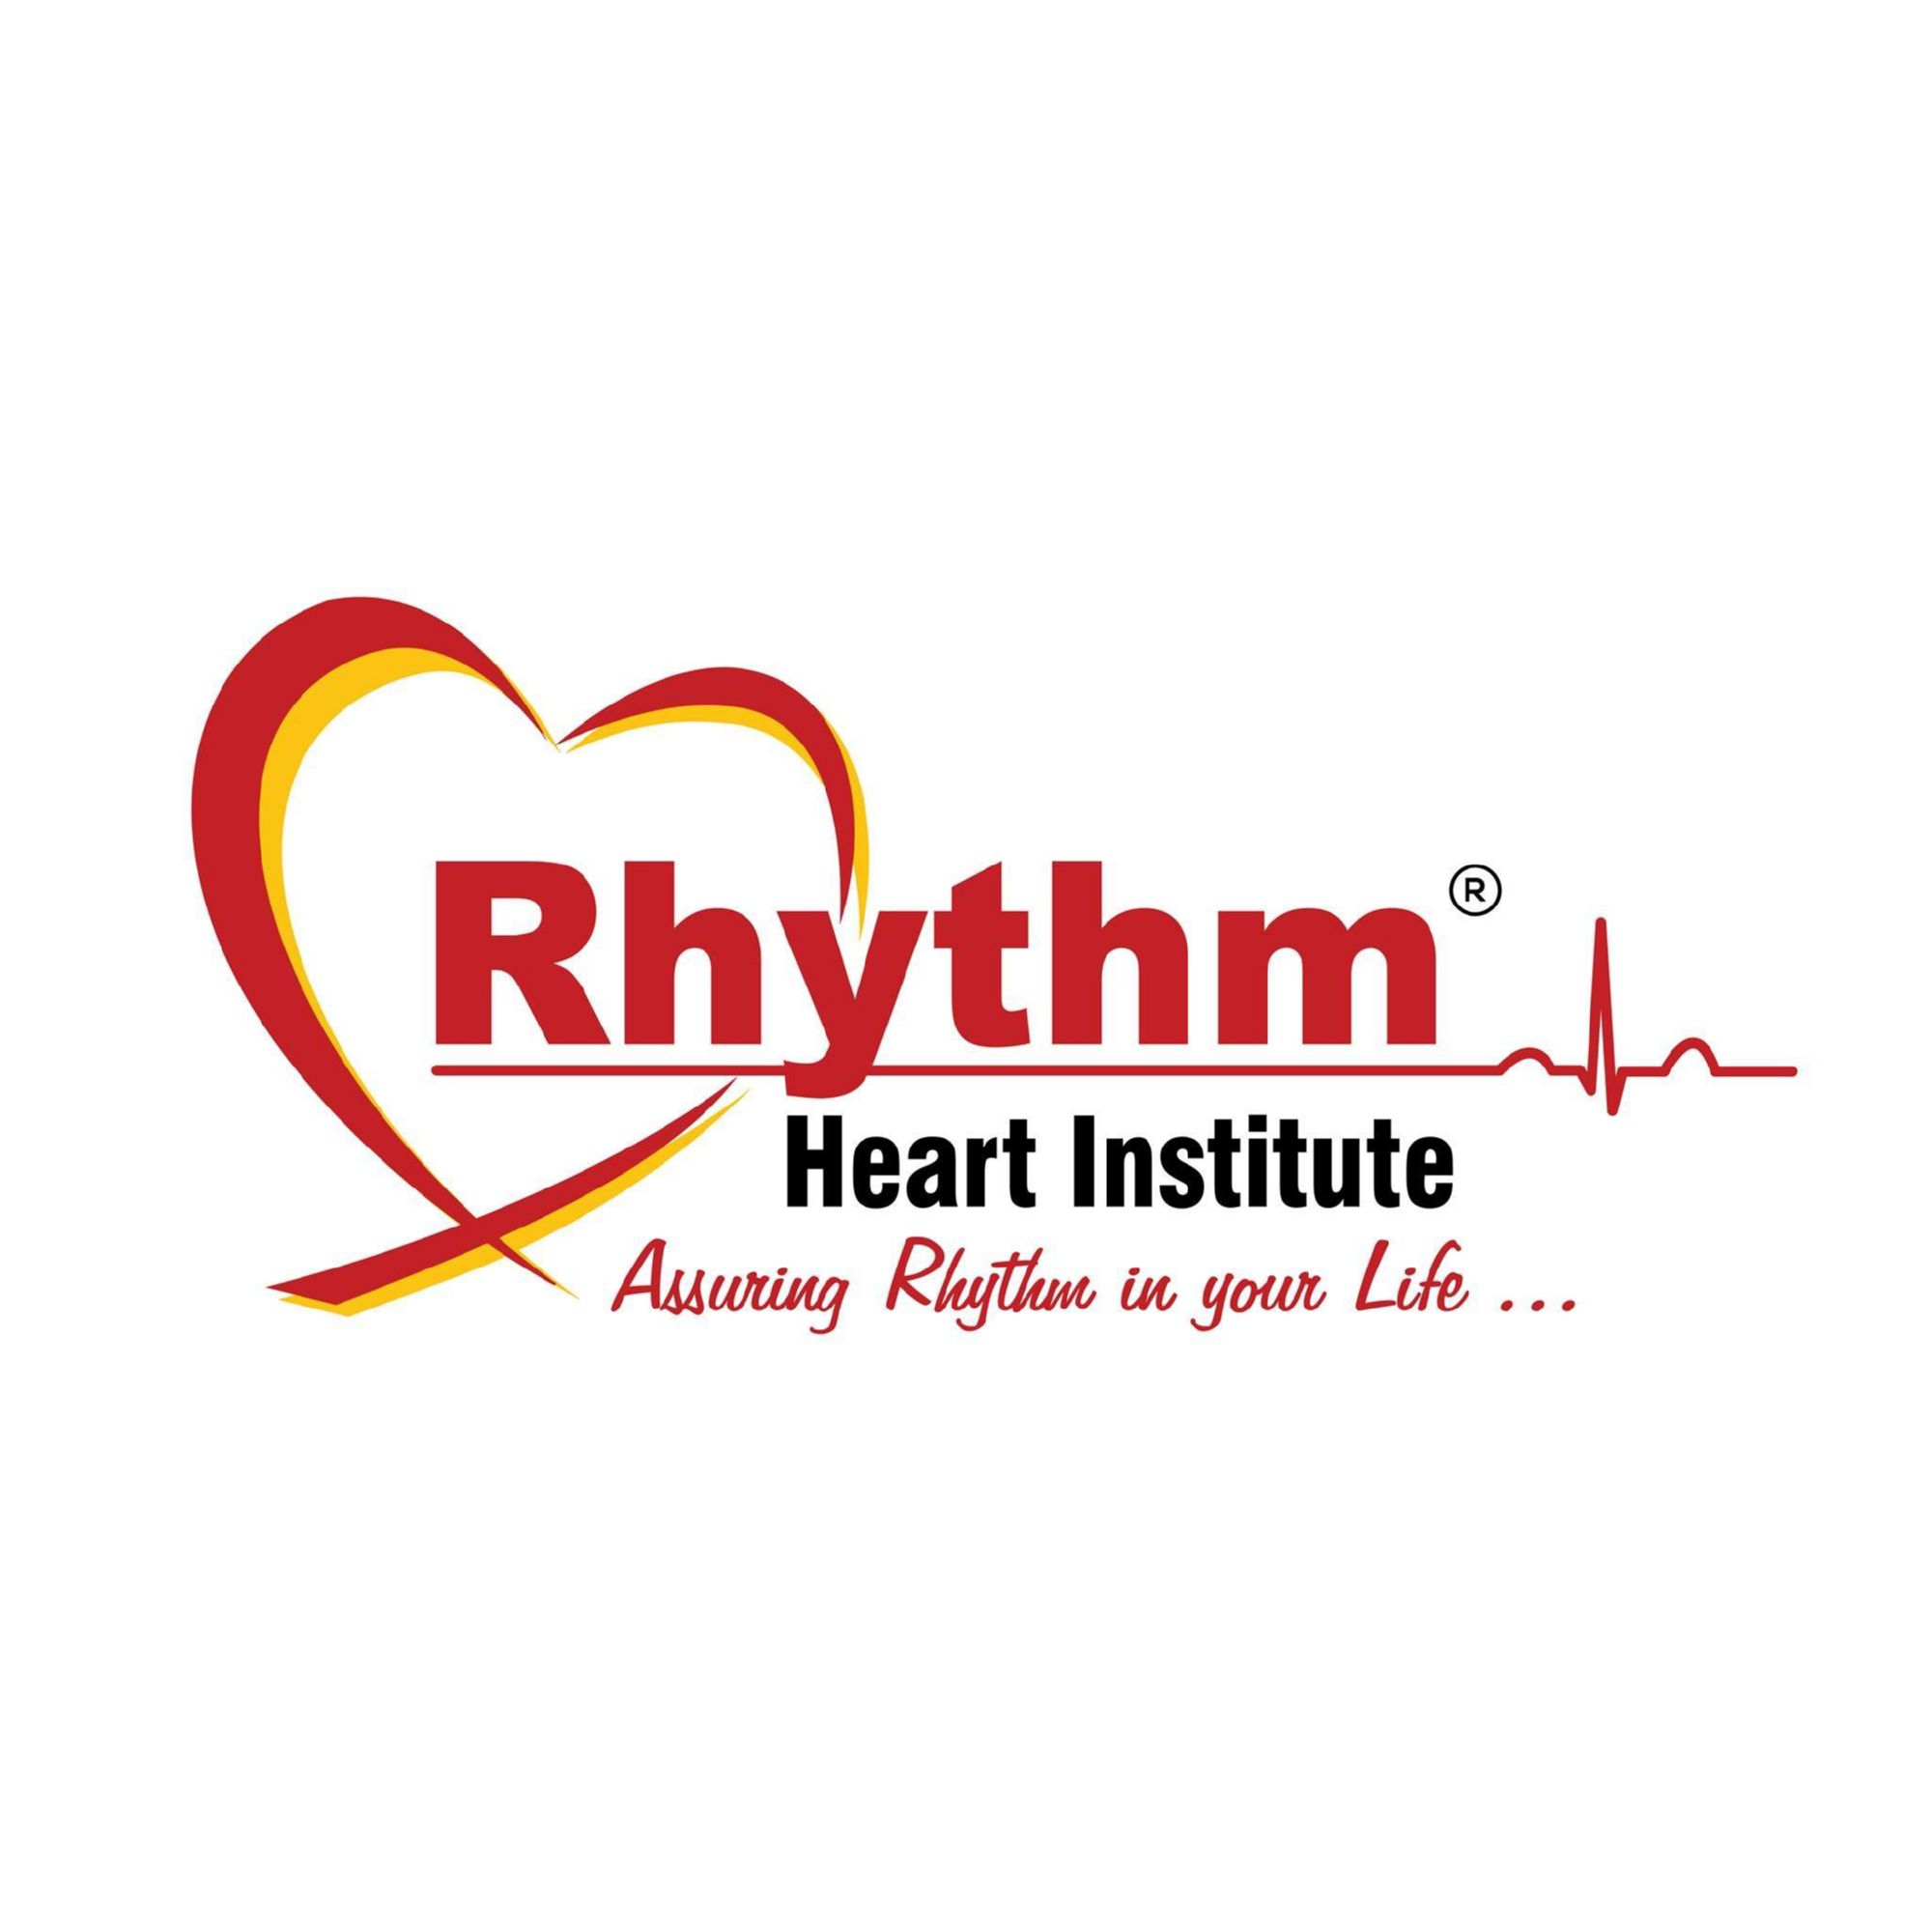 Rhythm Heart Institute|Dentists|Medical Services